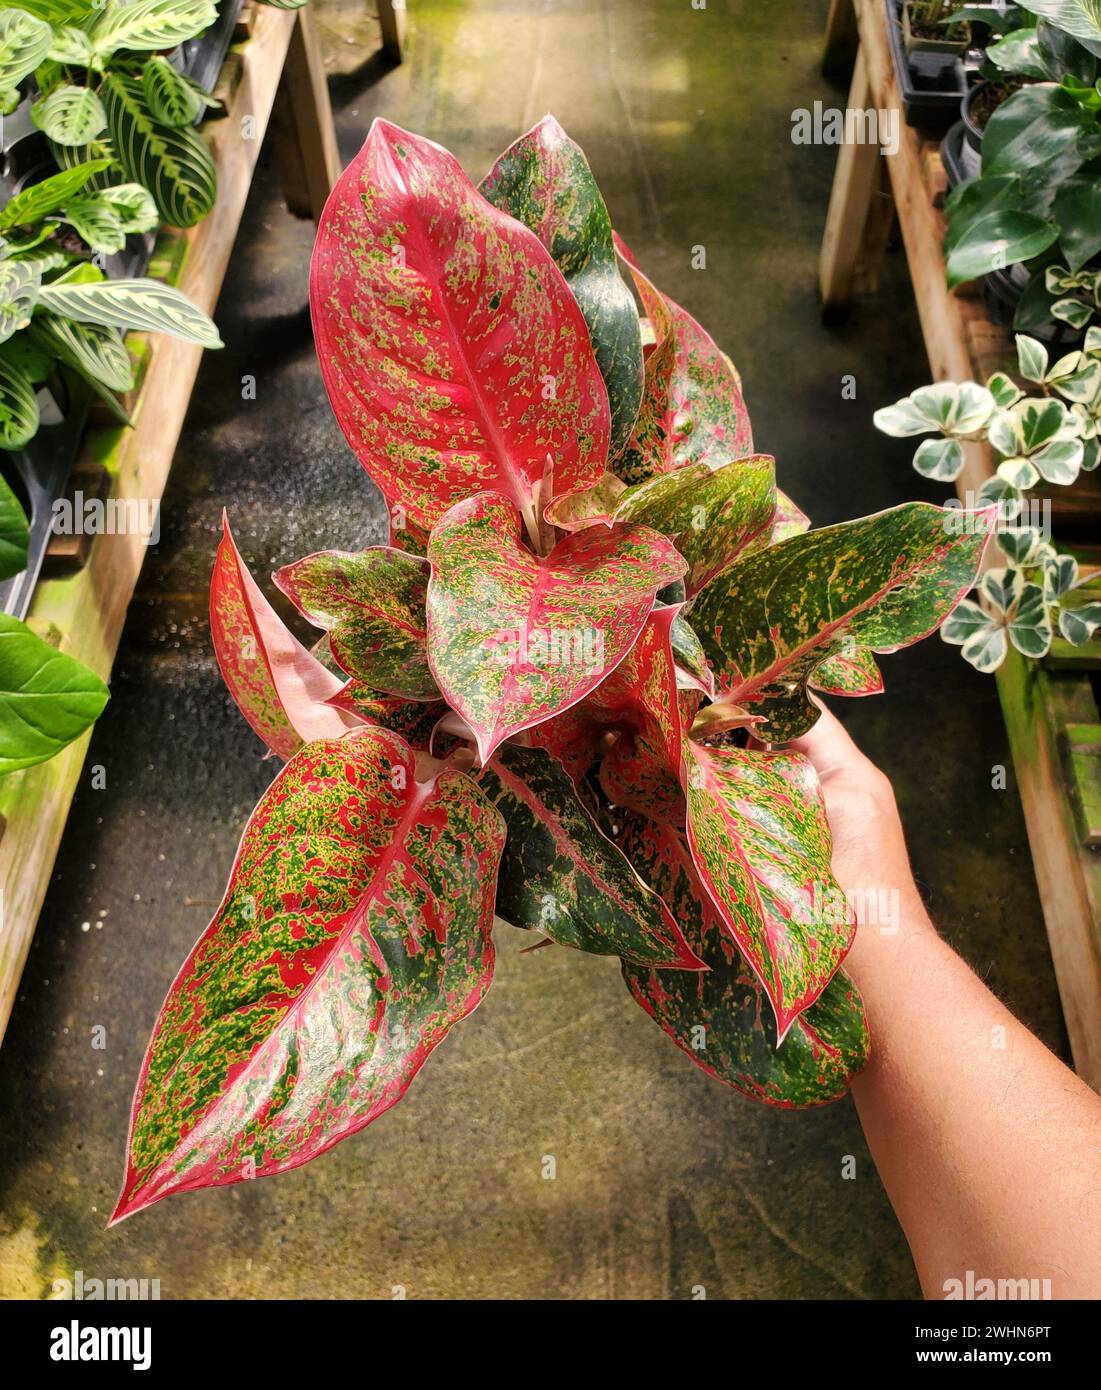 Holding a beautiful red leaf of Aglaonema Hybrid Stock Photo